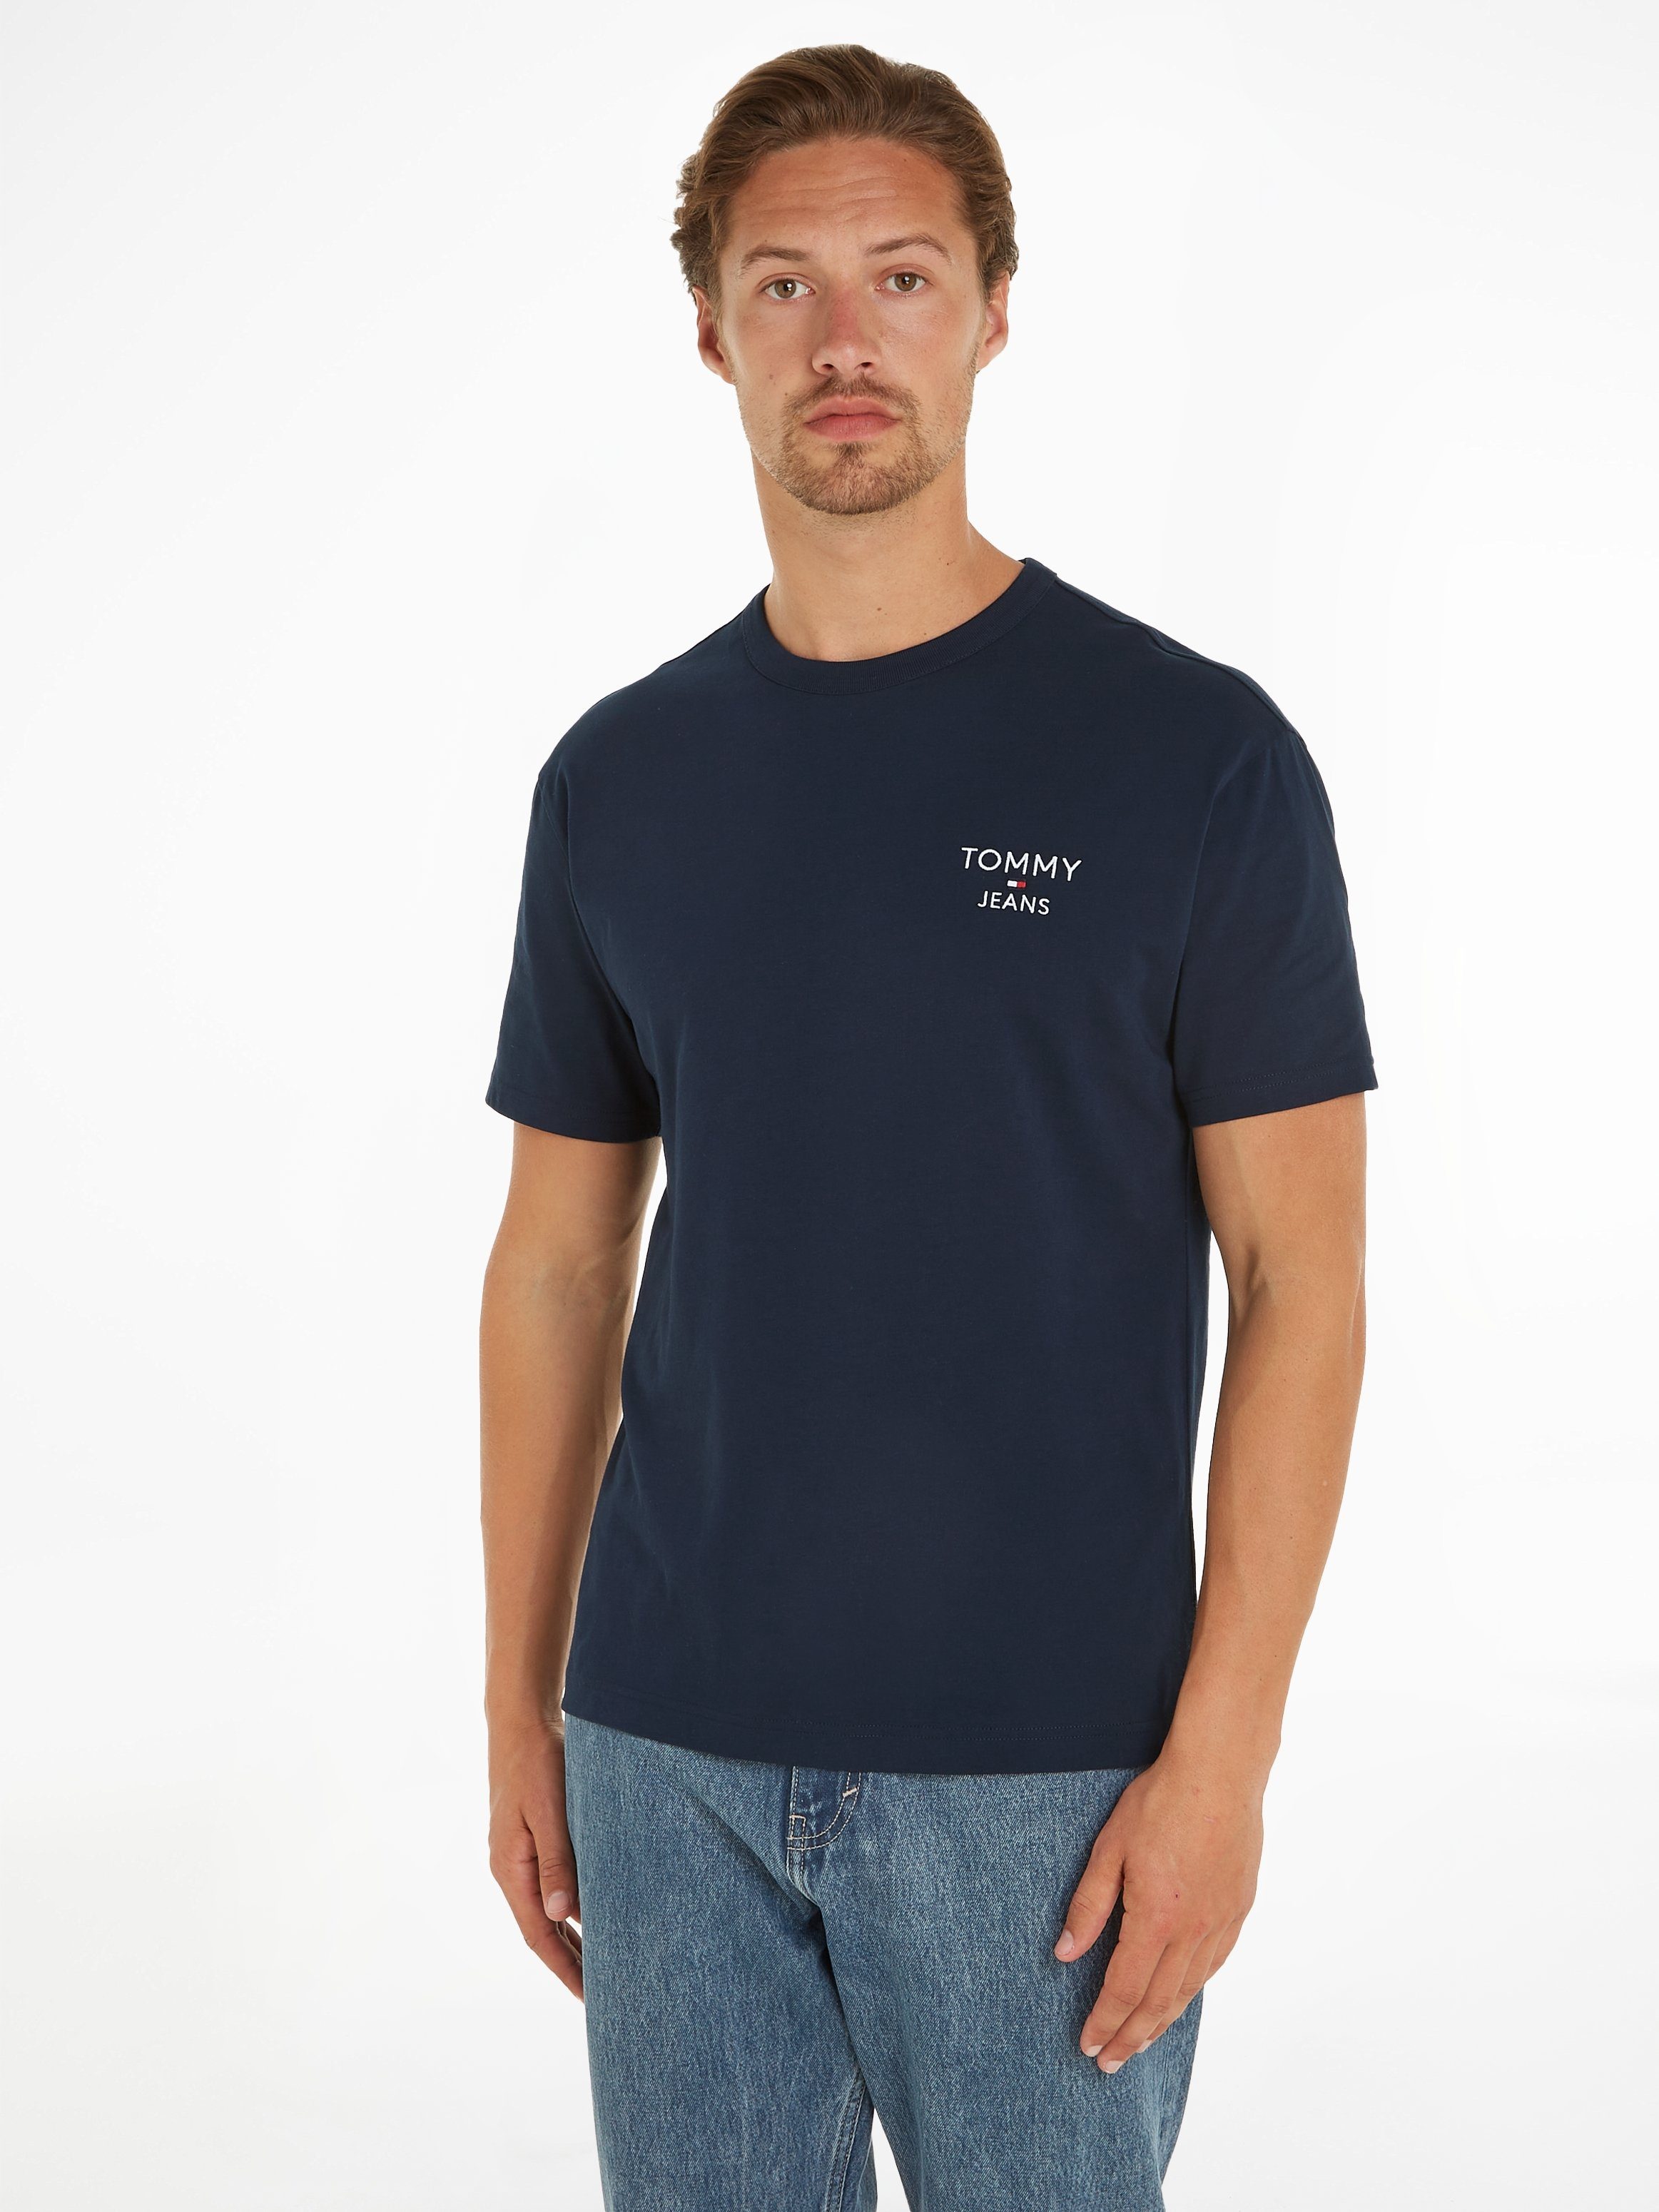 Tommy Jeans T-Shirt TJM REG Tommy TEE Stickerei EXT mit Jeans CORP